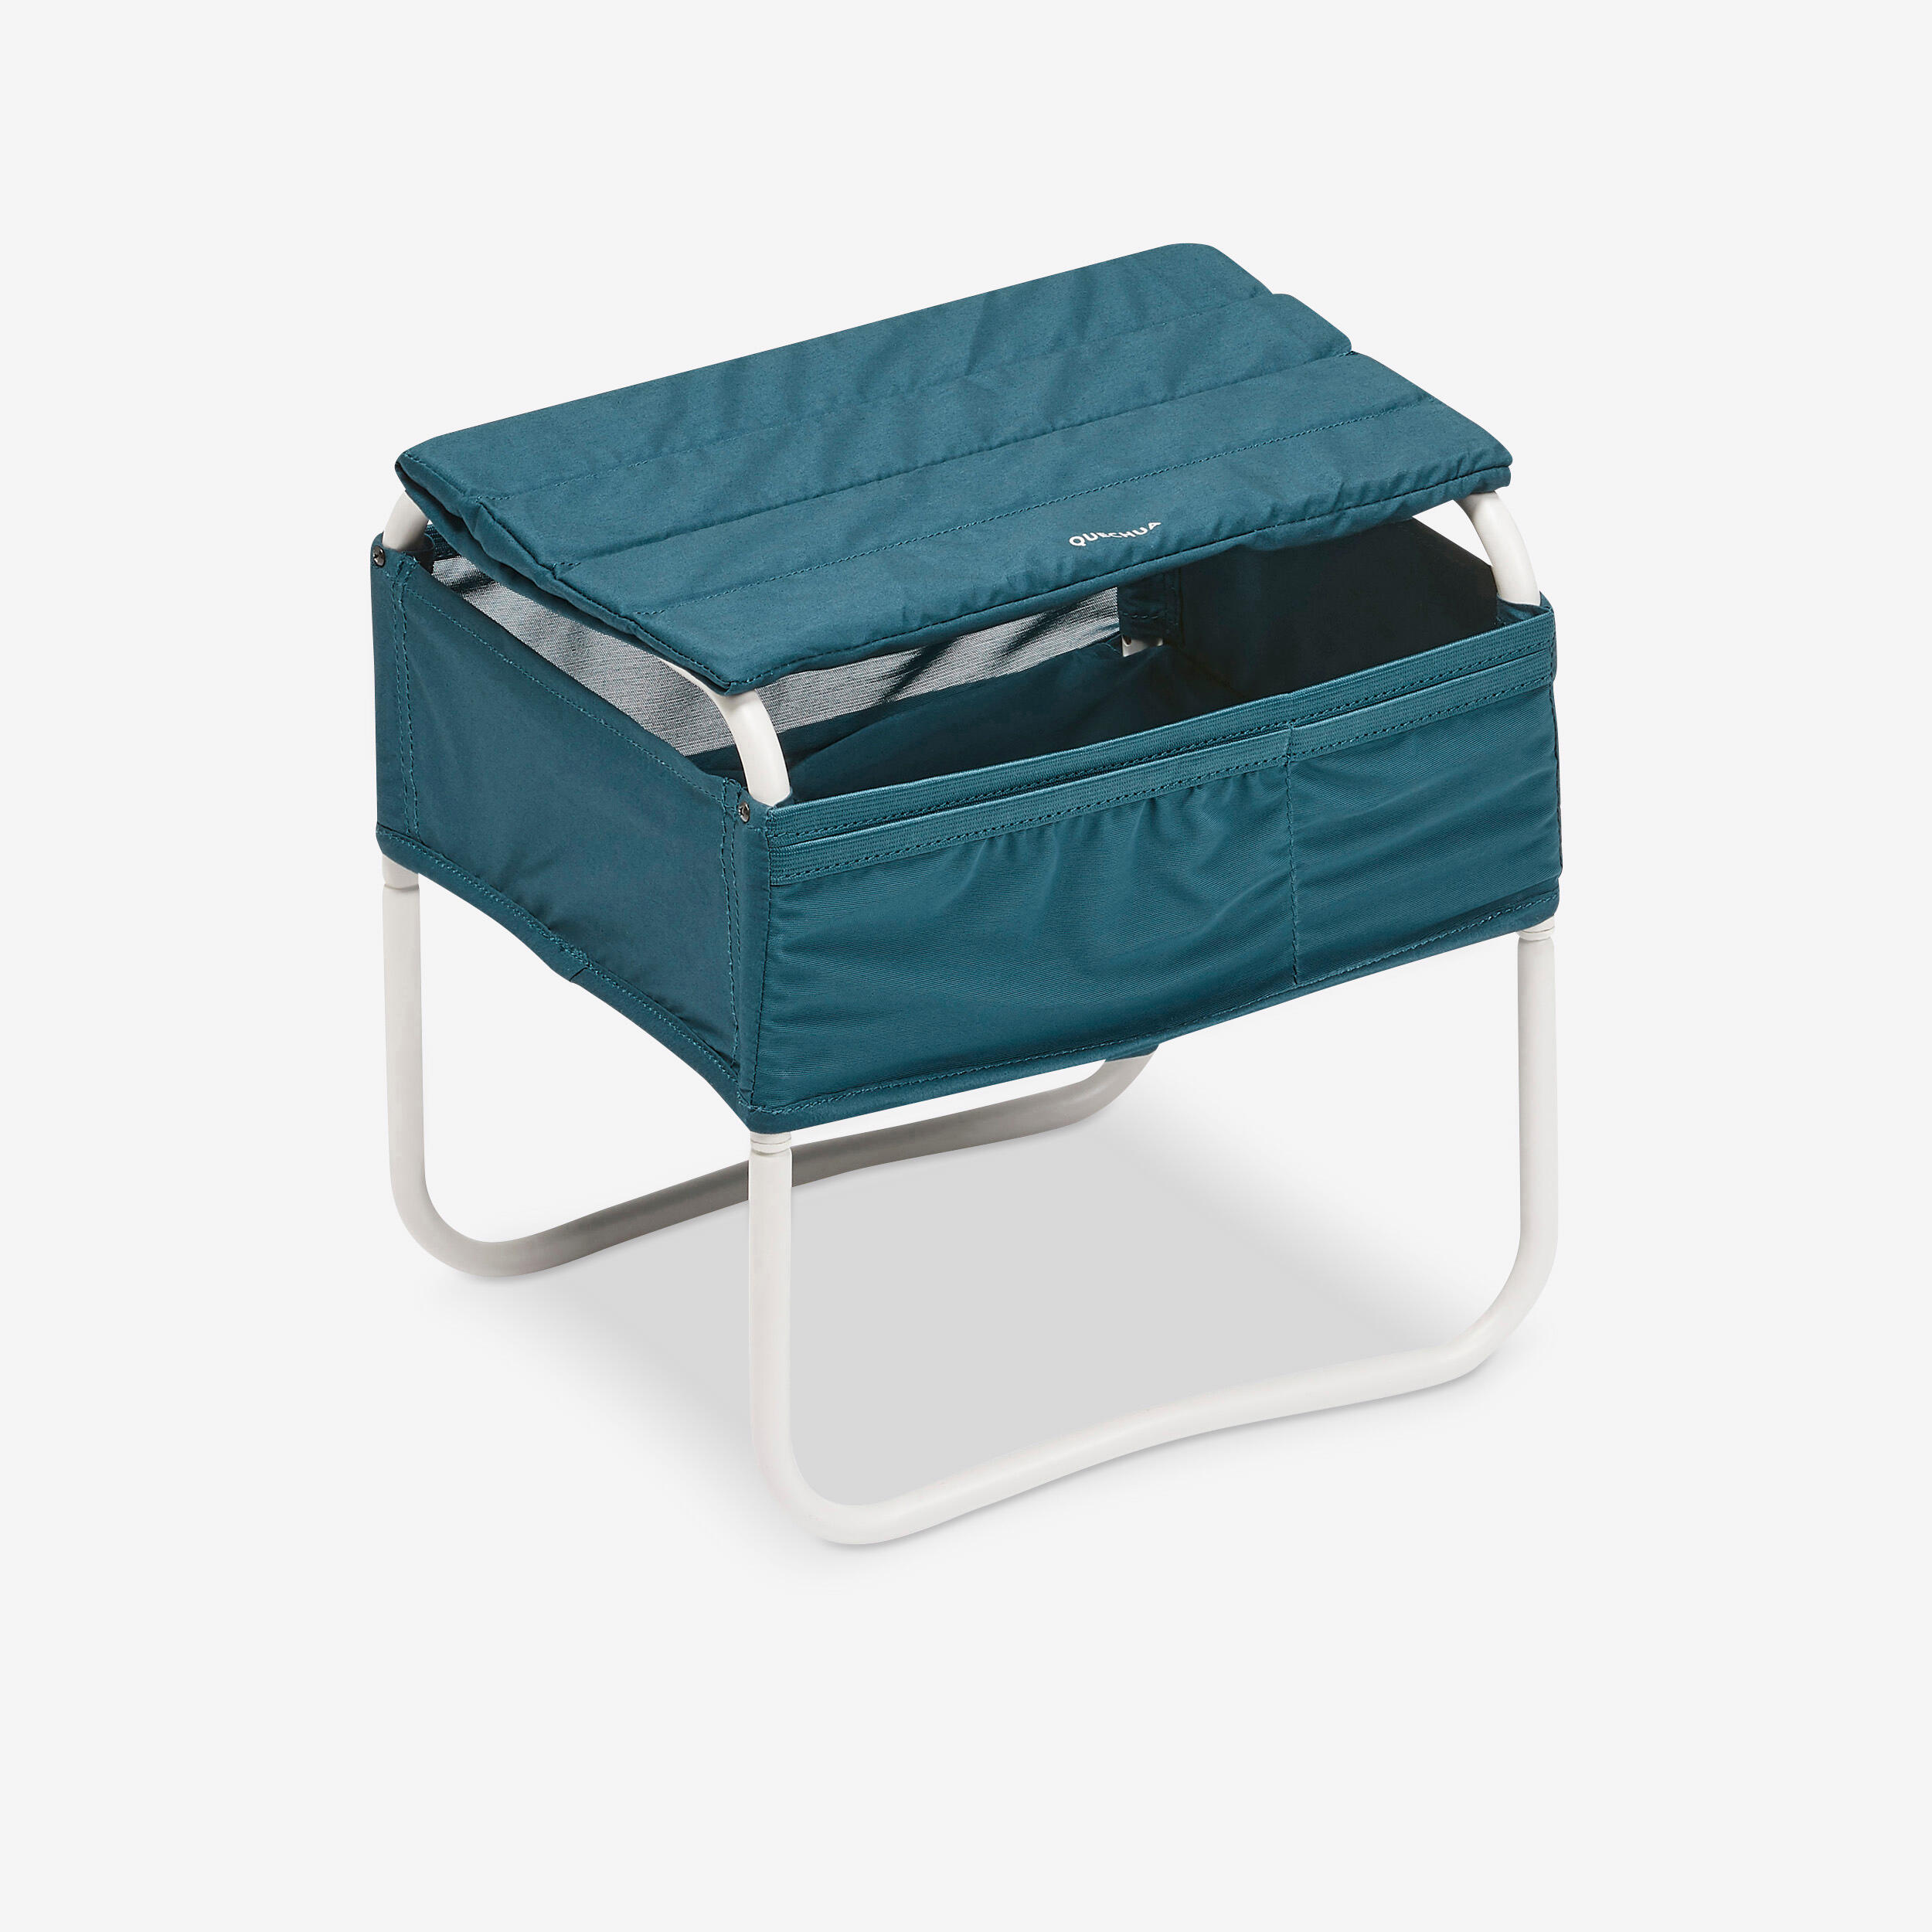 Camping bedside table - Compact 1/4